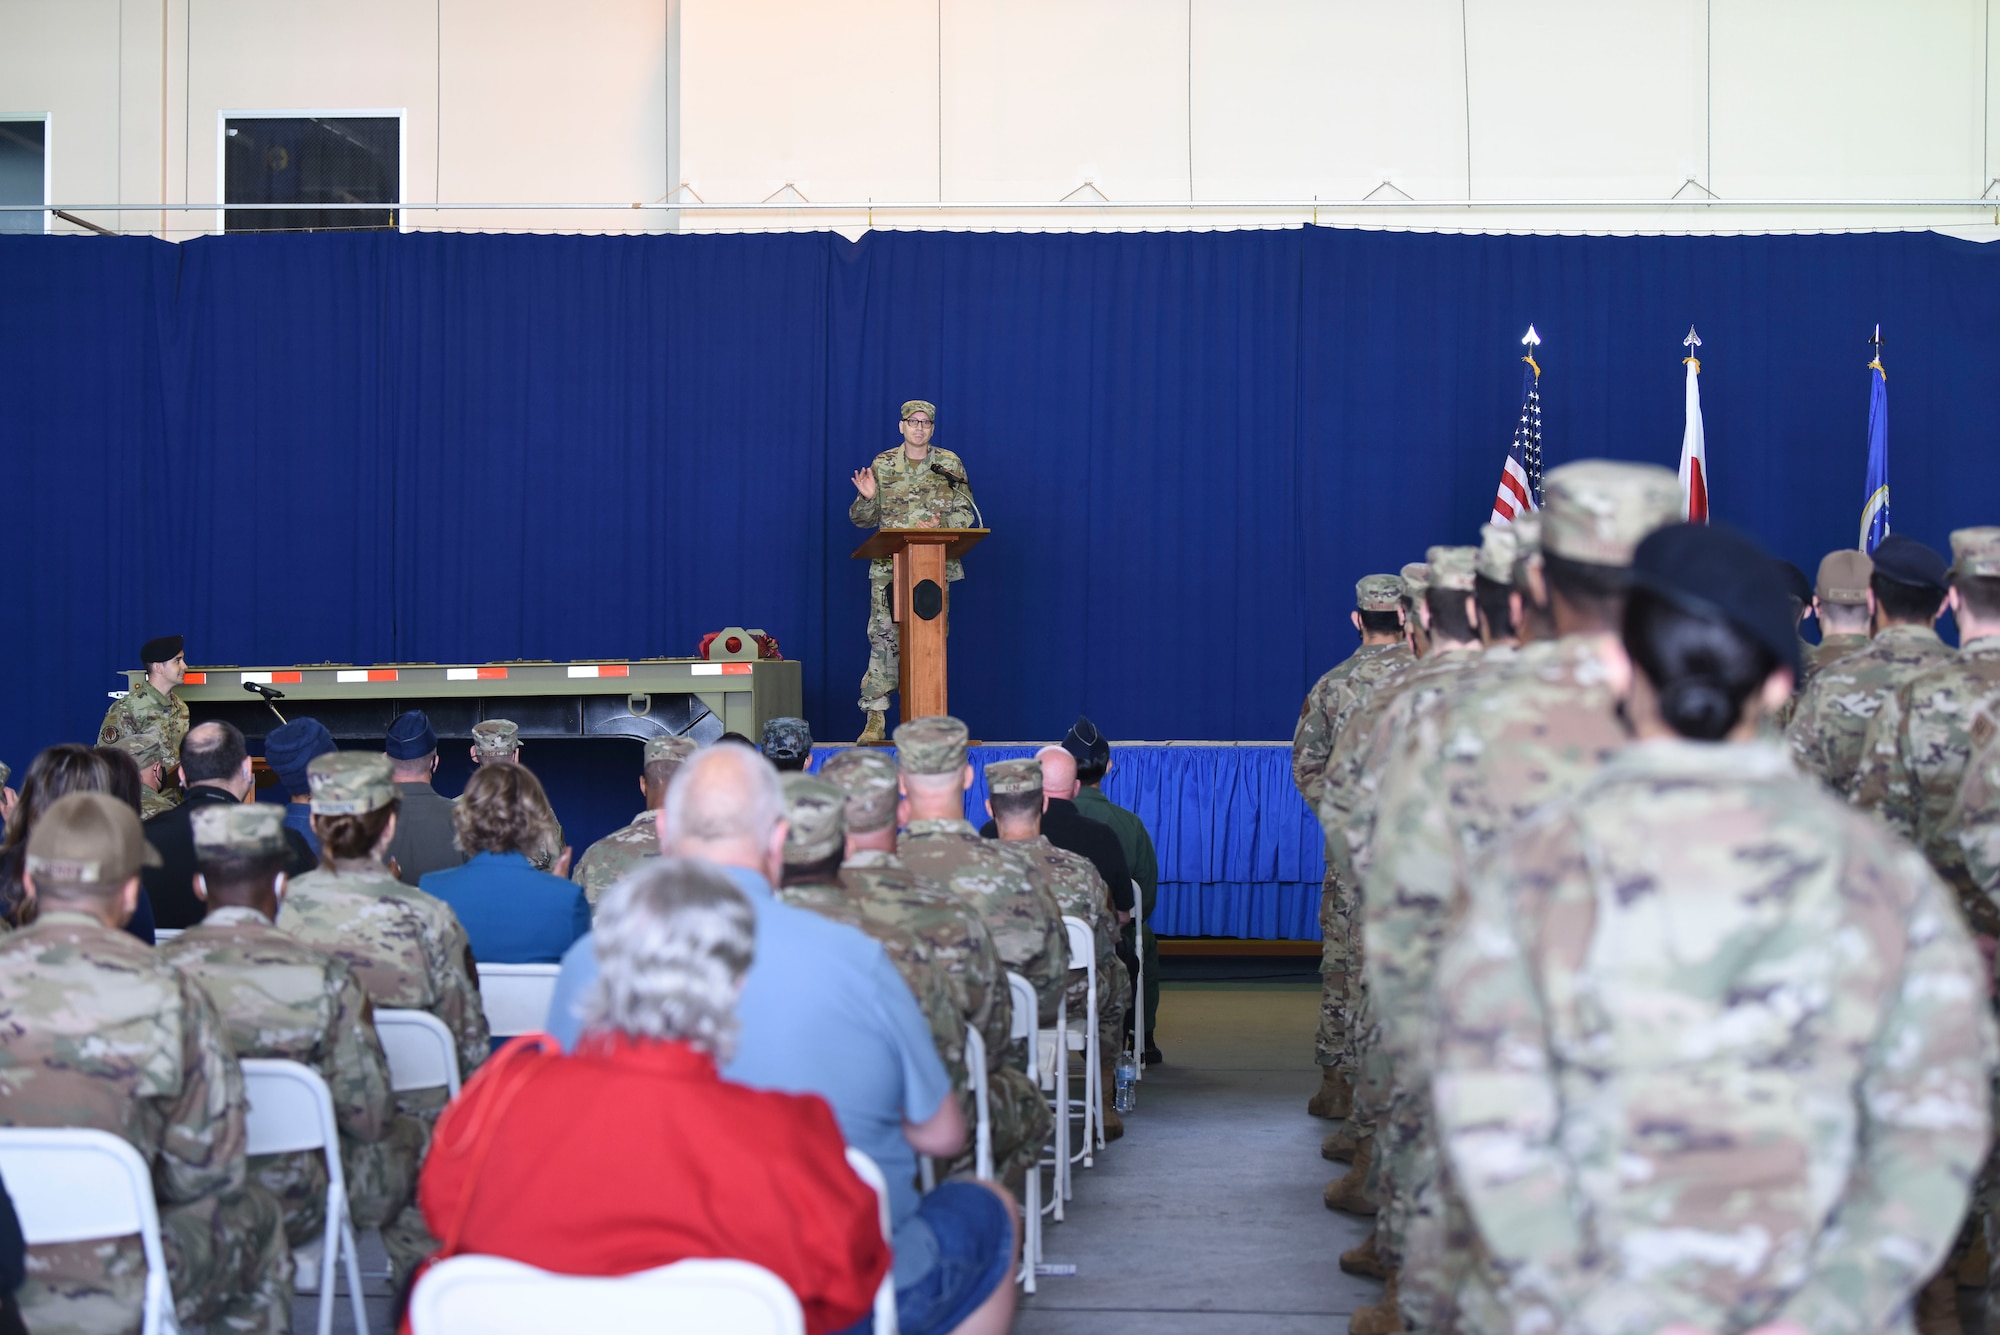 A military member in uniform stands on a stage behind a podium speaking to a crowd of civilians and military members seated to the left side and a flight of uniformed military members standing at parade rest at the right side.